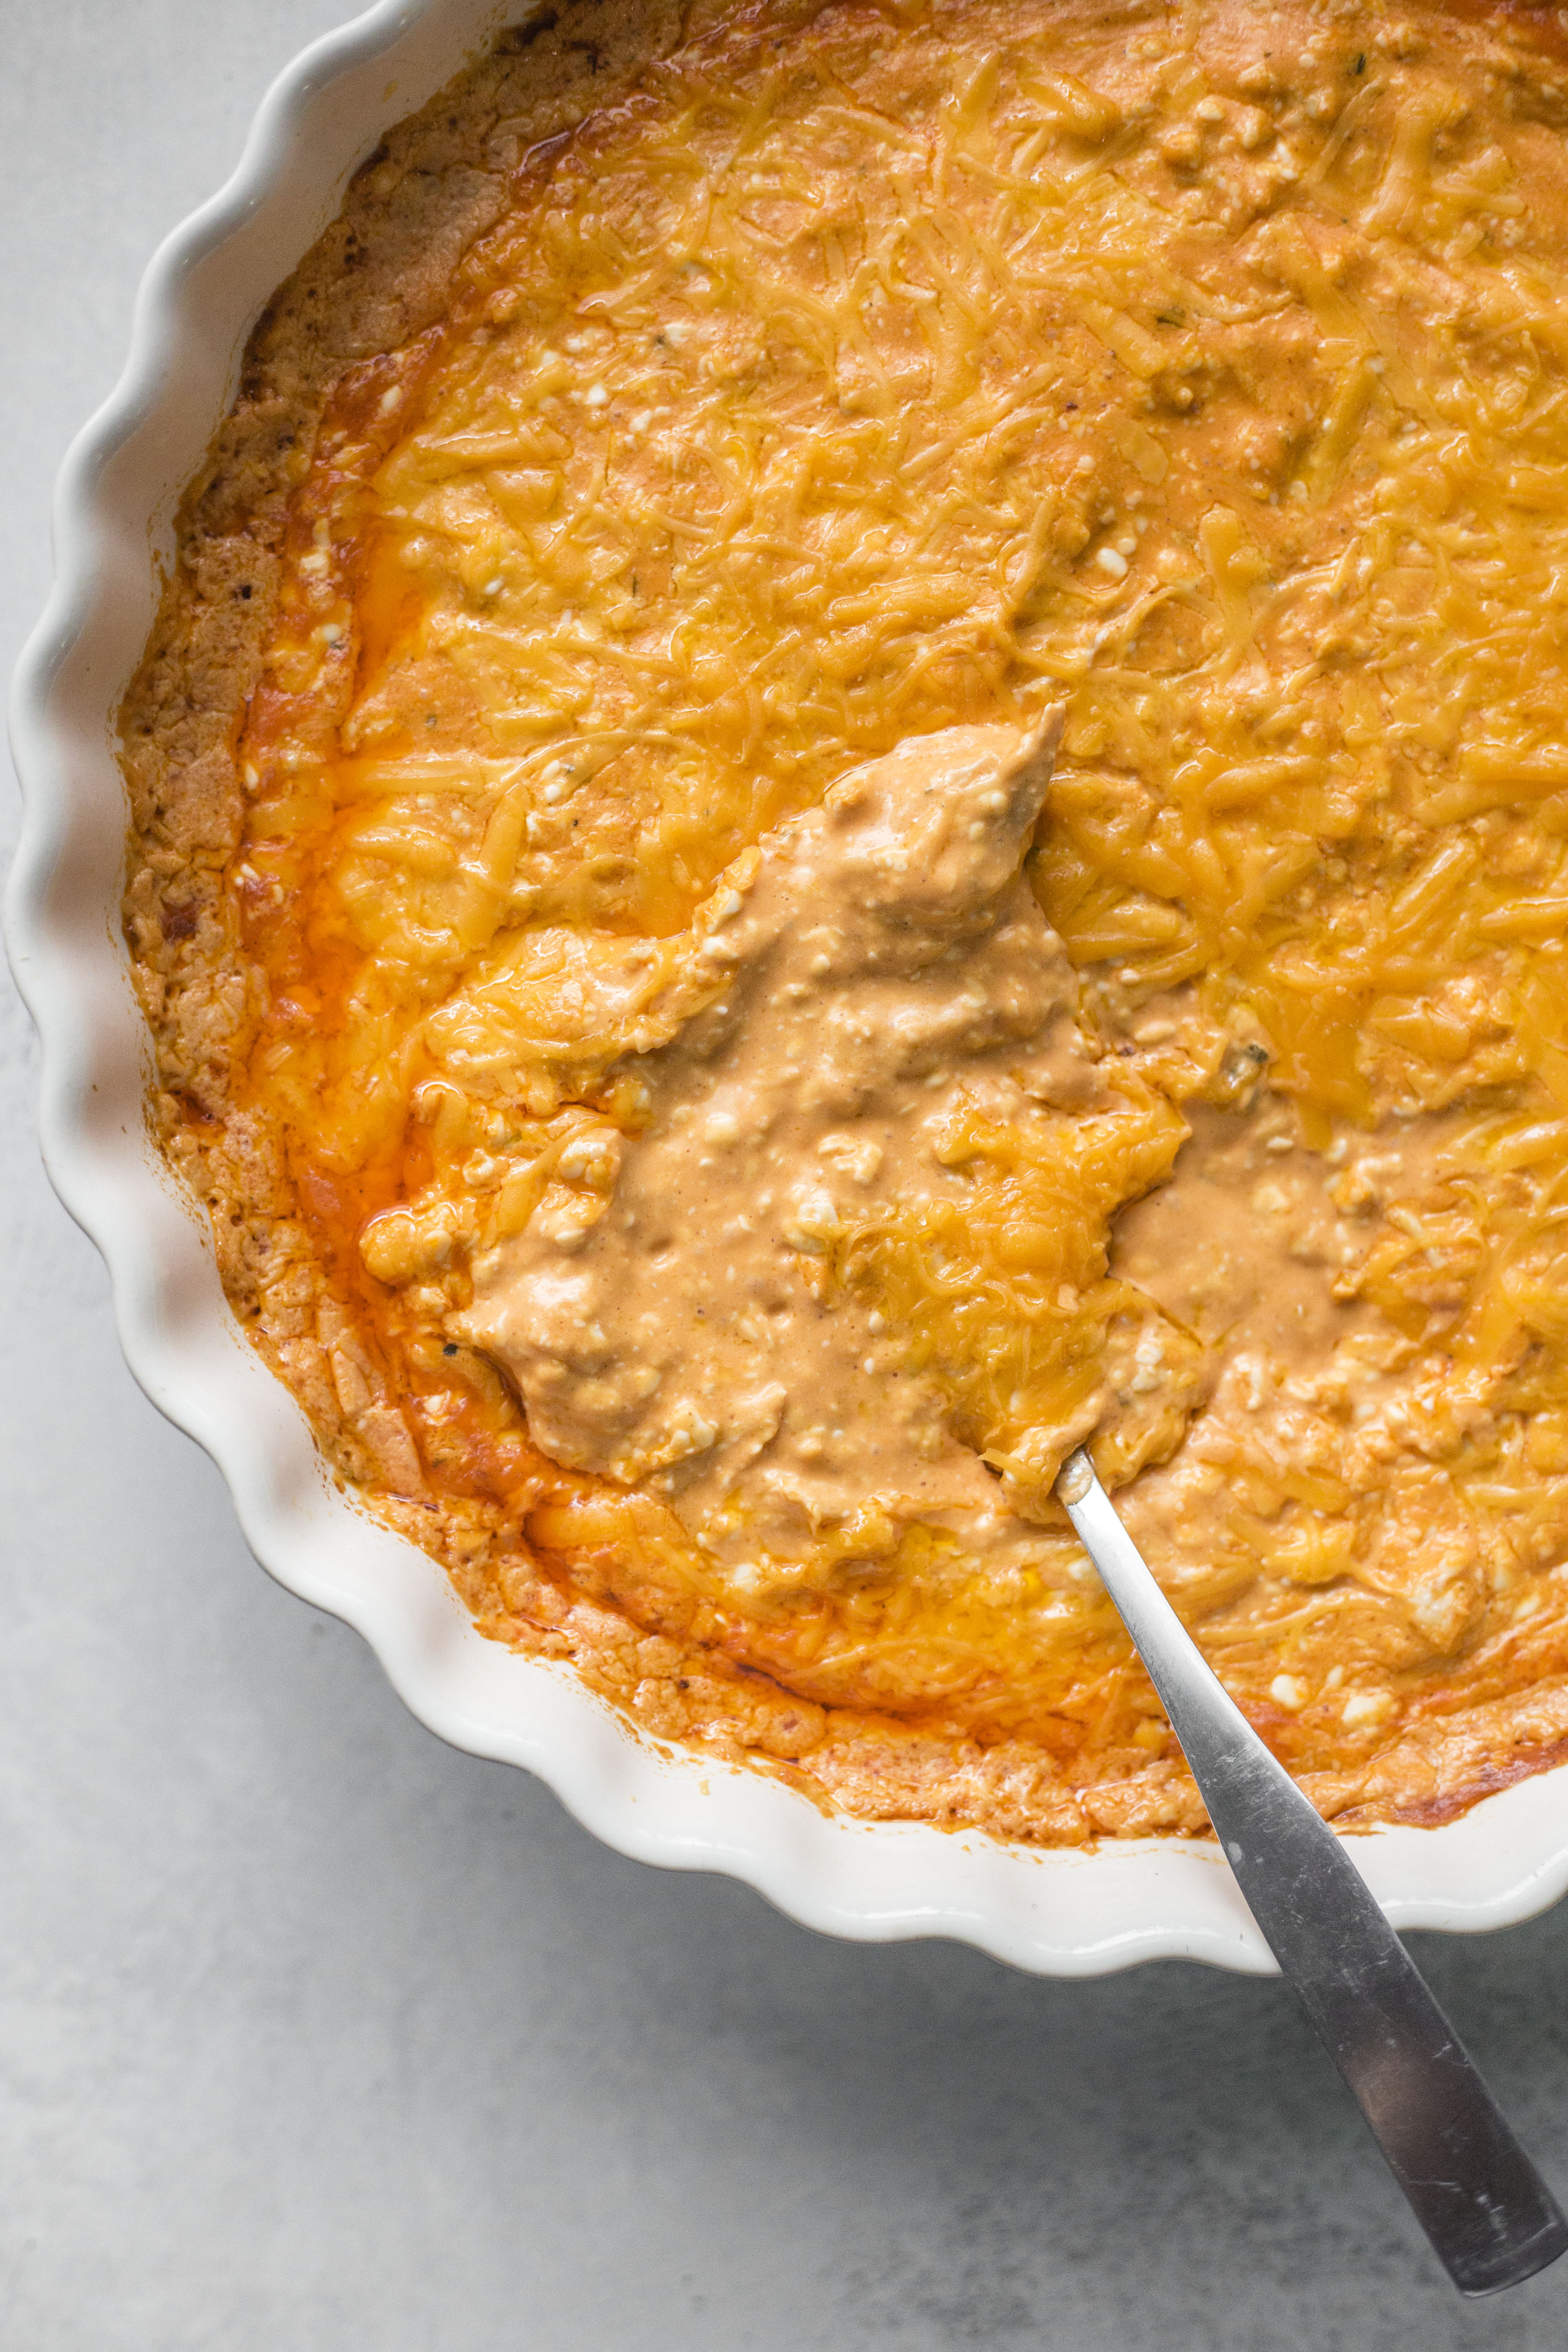 This is the best buffalo chicken dip recipe! Creamy, cheesy, slightly spicy and full of delicious chicken and flavors. Perfect for tailgating, football games, parties and weekends. This recipe is classic and super easy to make. I howsweeteats.com #buffalo #chicken #dip #recipe